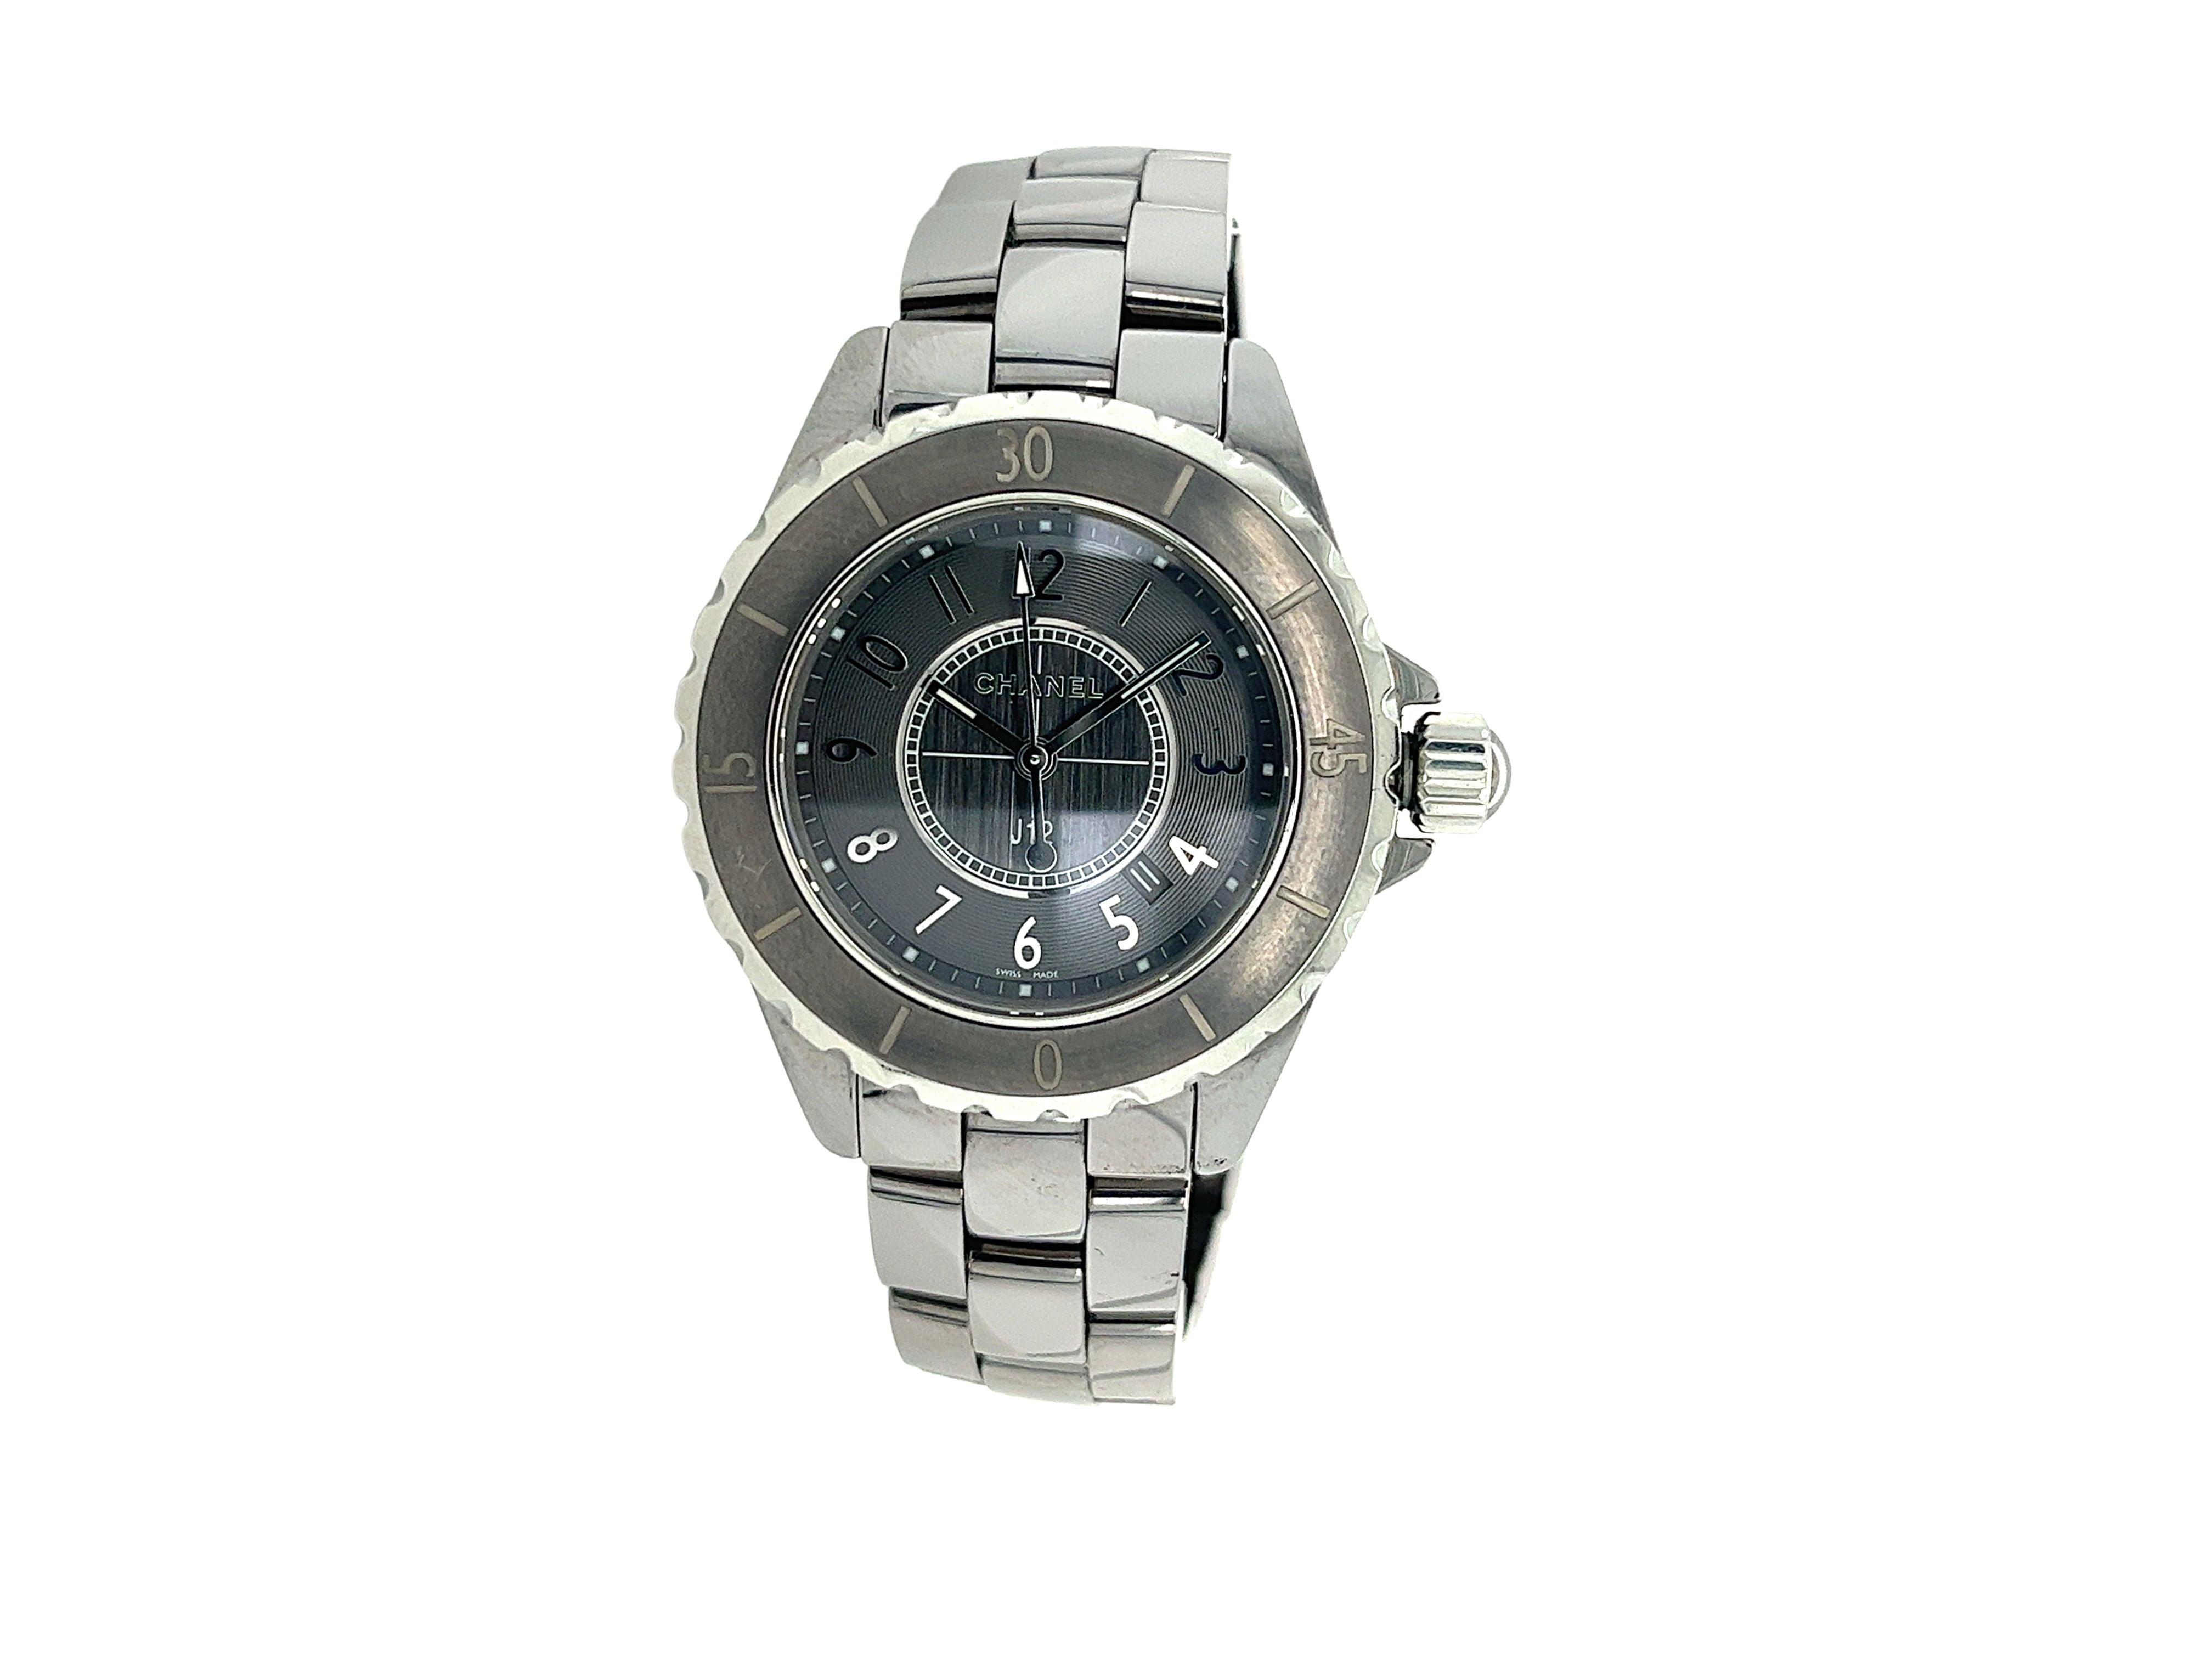 Chanel J12 Quartz Black Ceramic and Stainless Steel 33mm Watch